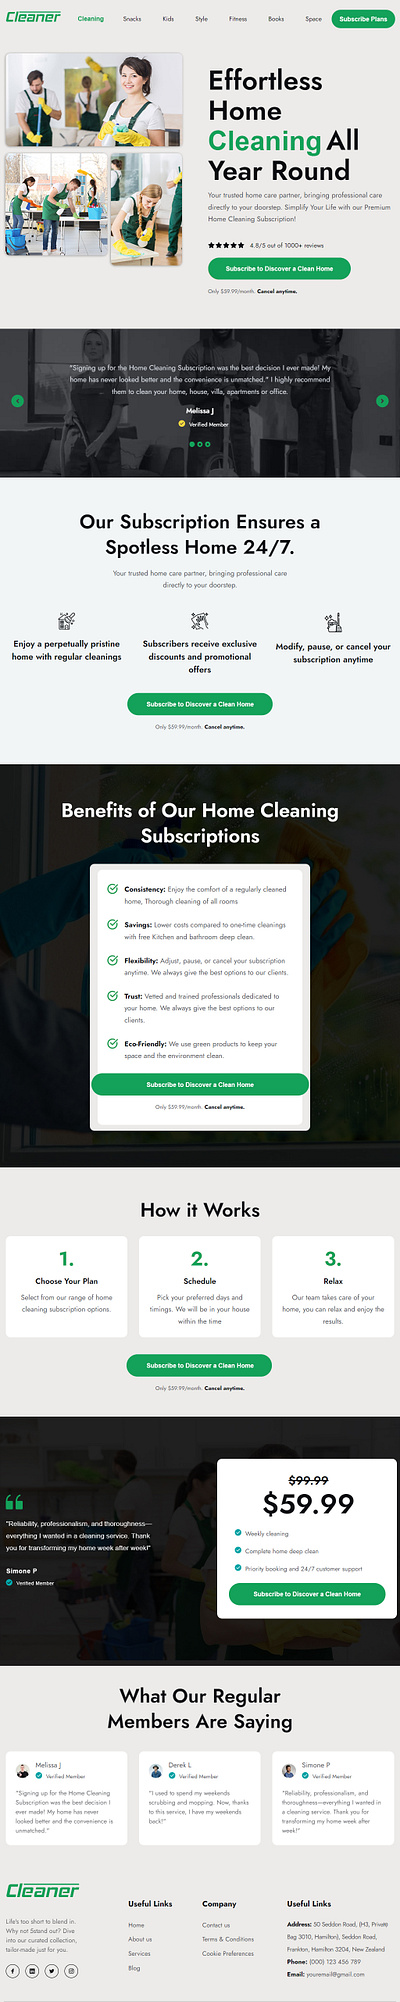 Cleaner - [Home Cleaning Service] Website graphic design logo ui